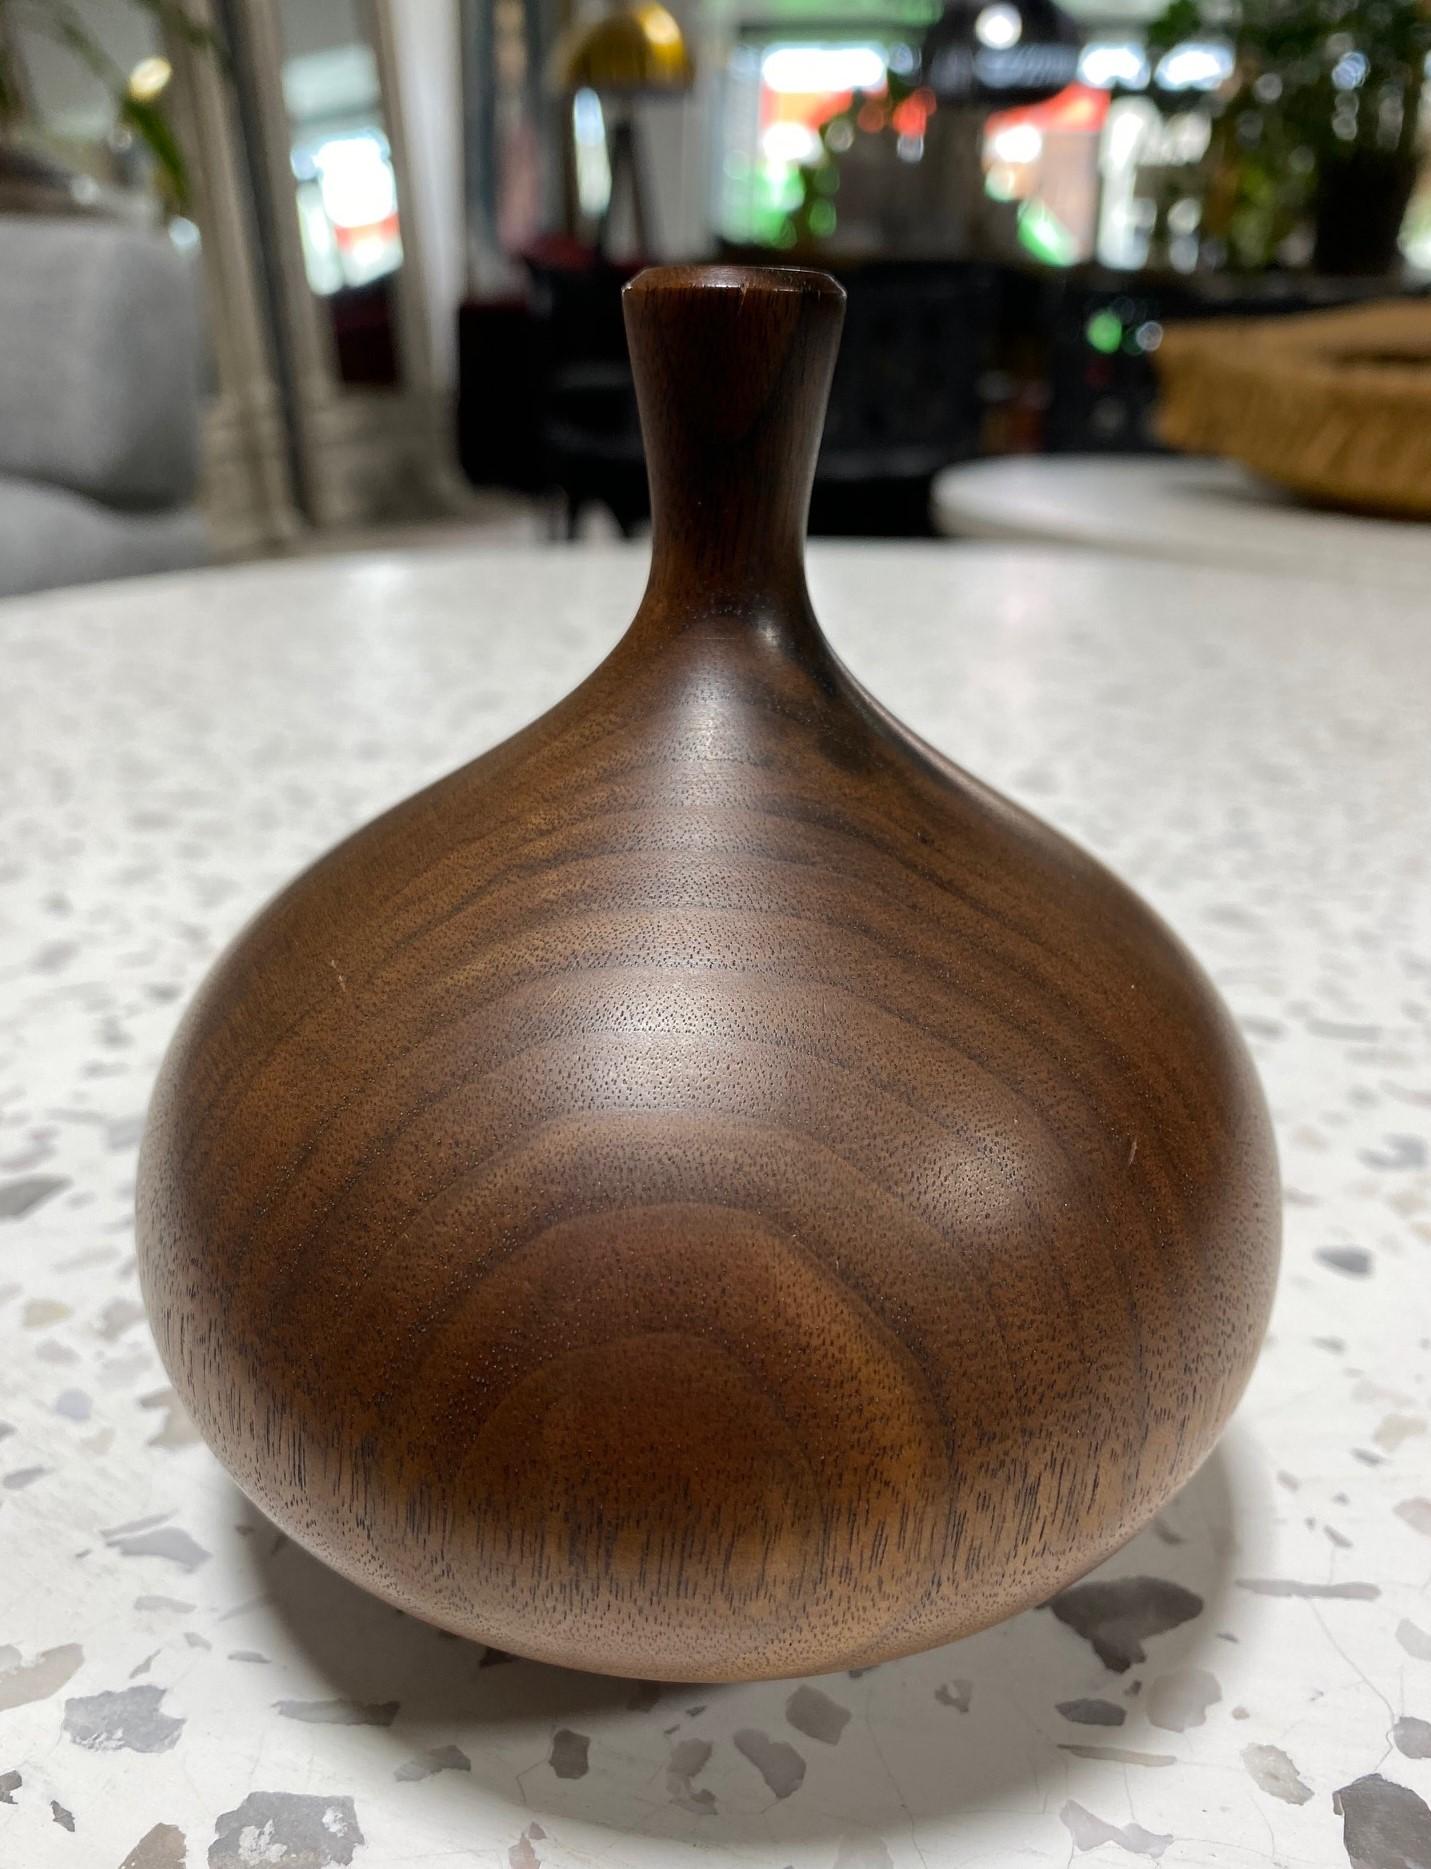 A beautifully executed, handmade, wood-turned vase by master woodturner Rude Osolnik who is widely regarded, along with Bob Stocksdale, as one of the finest woodturners in American woodturning history. In 1992, he was presented by then Kentucky